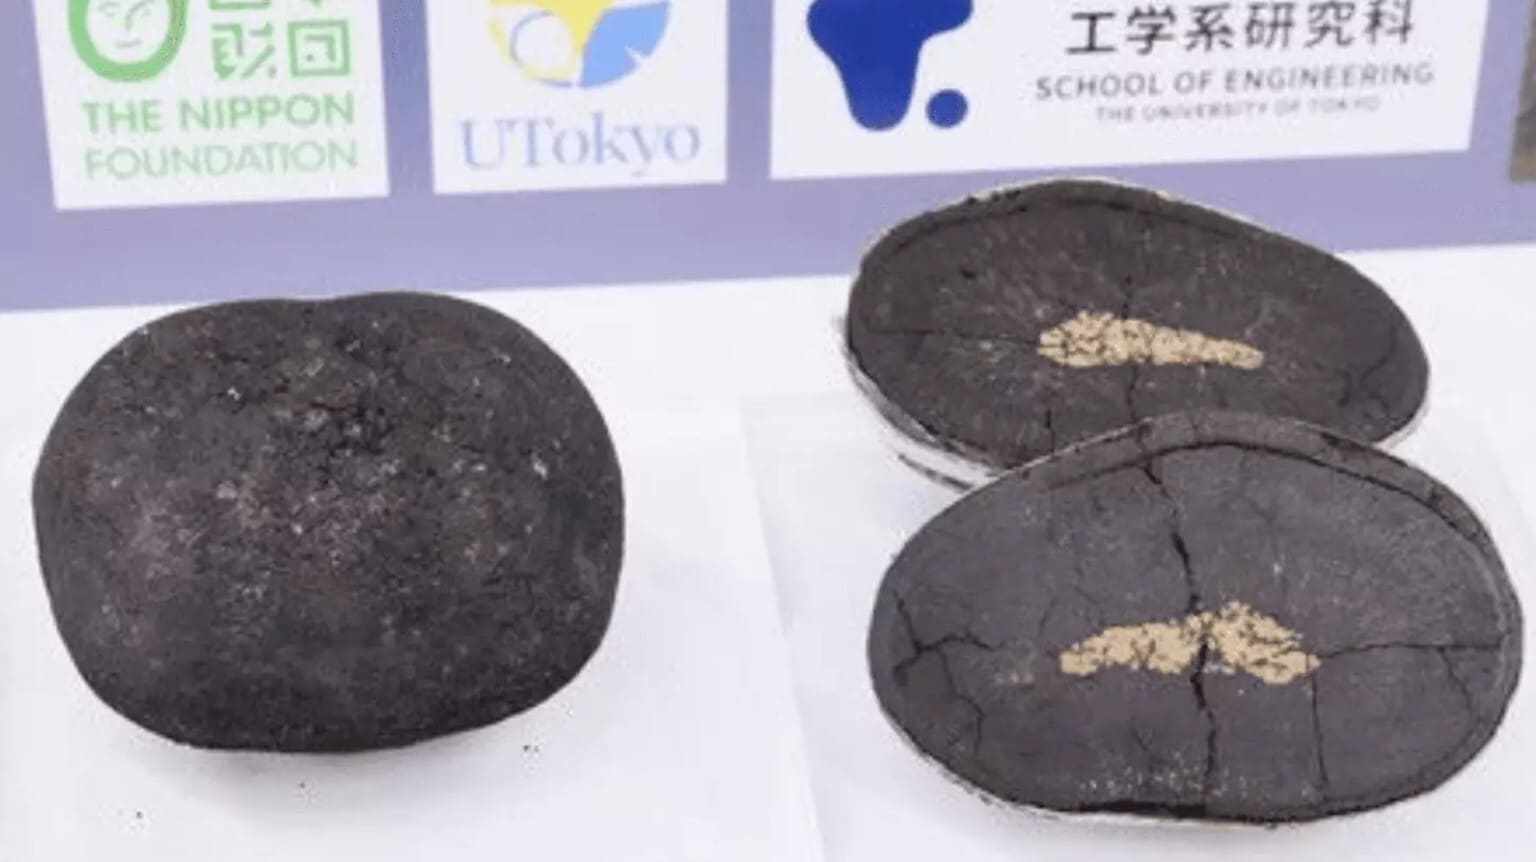 Japan Discovers 230 Million Tons Of Rare Minerals, Could Help Them Become A World Superpower